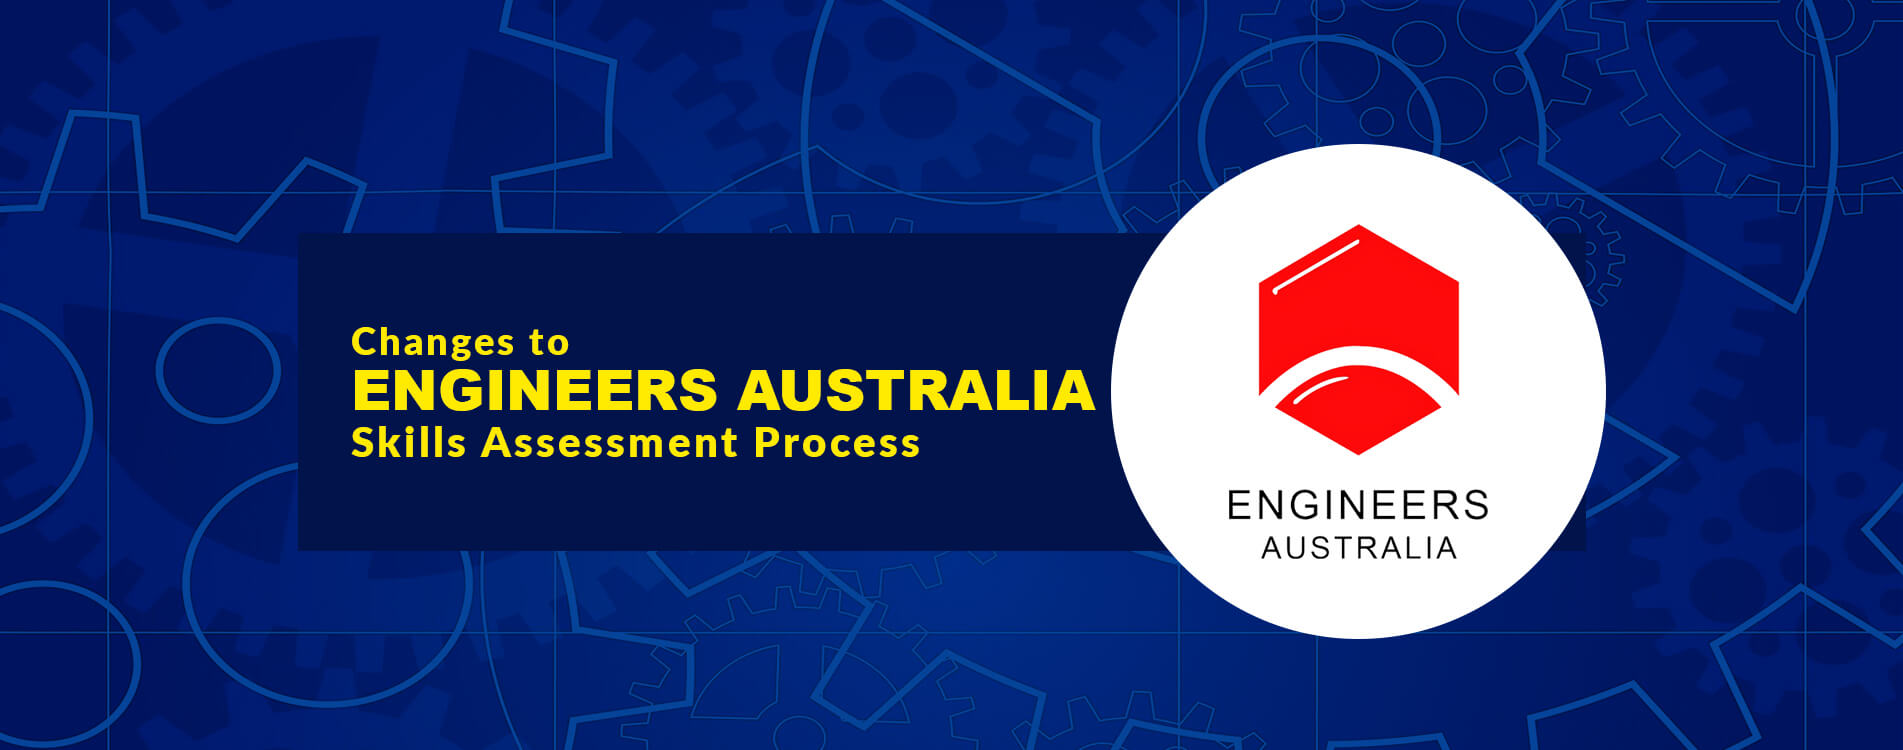 New User-Friendly Changes Introduced to Skills Assessment Process of Engineers Australia (EA)